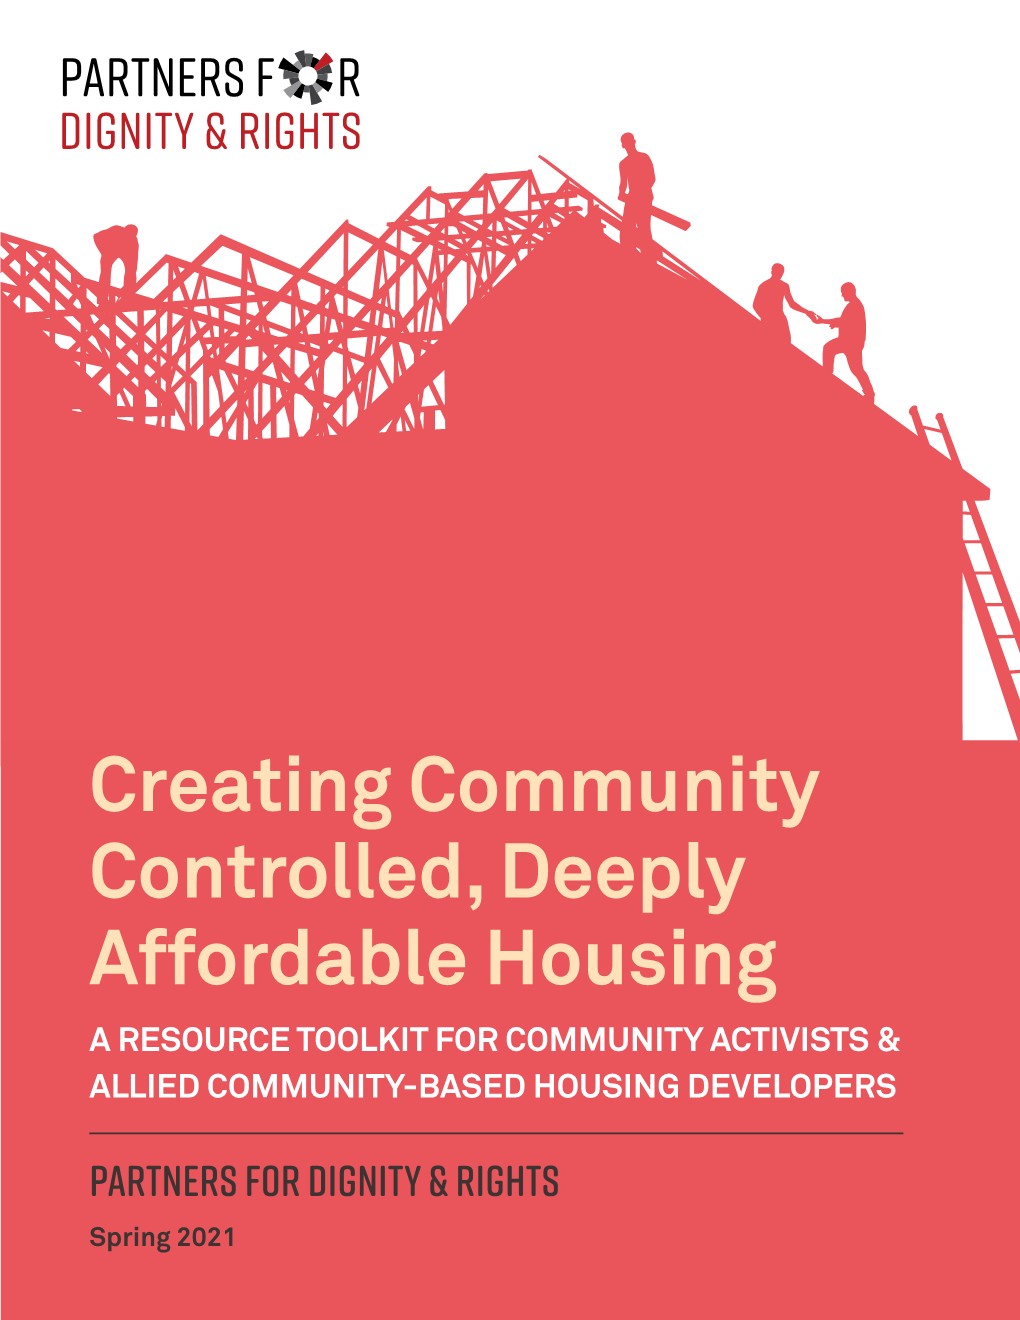 Creating Community Controlled, Deeply Affordable Housing a RESOURCE TOOLKIT for COMMUNITY ACTIVISTS & ALLIED COMMUNITY-BASED HOUSING DEVELOPERS